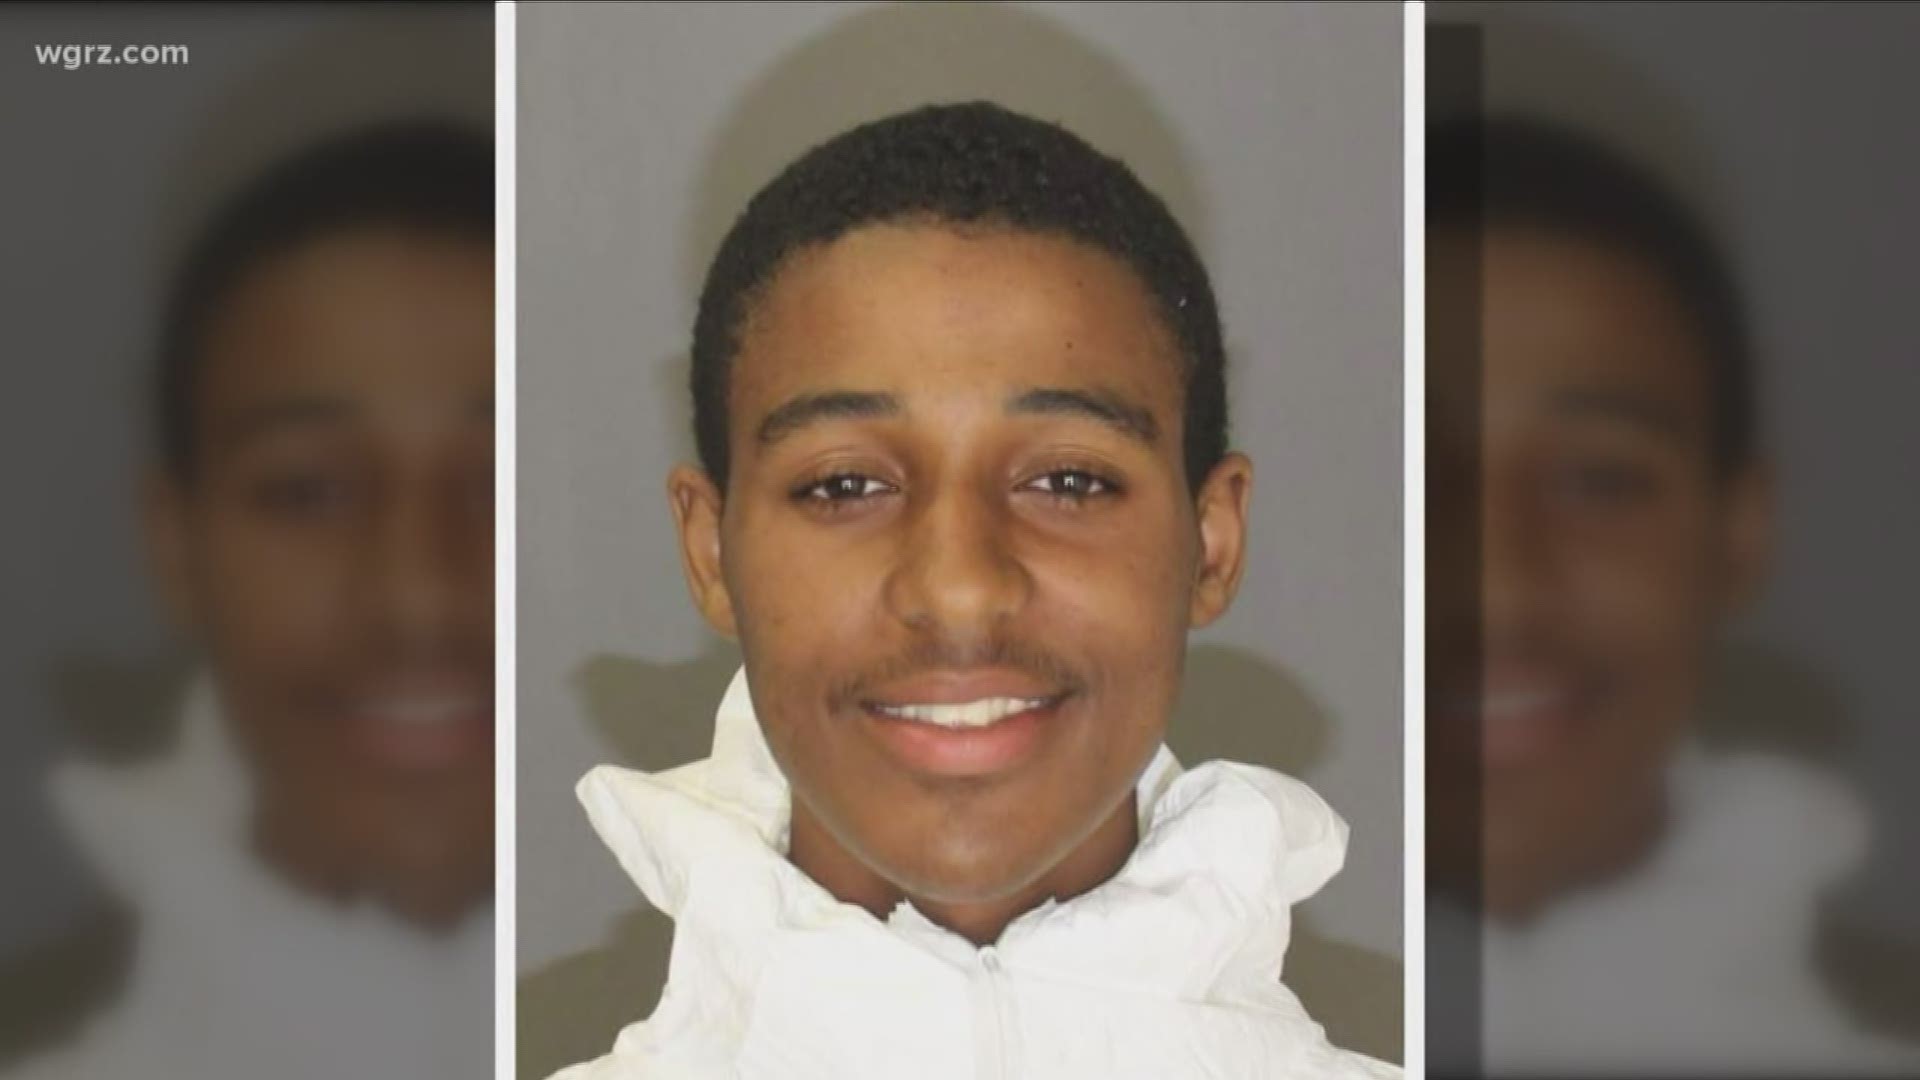 17-year-old Jason Washington is charged with murder, attempted murder, and criminal possession of a weapon.